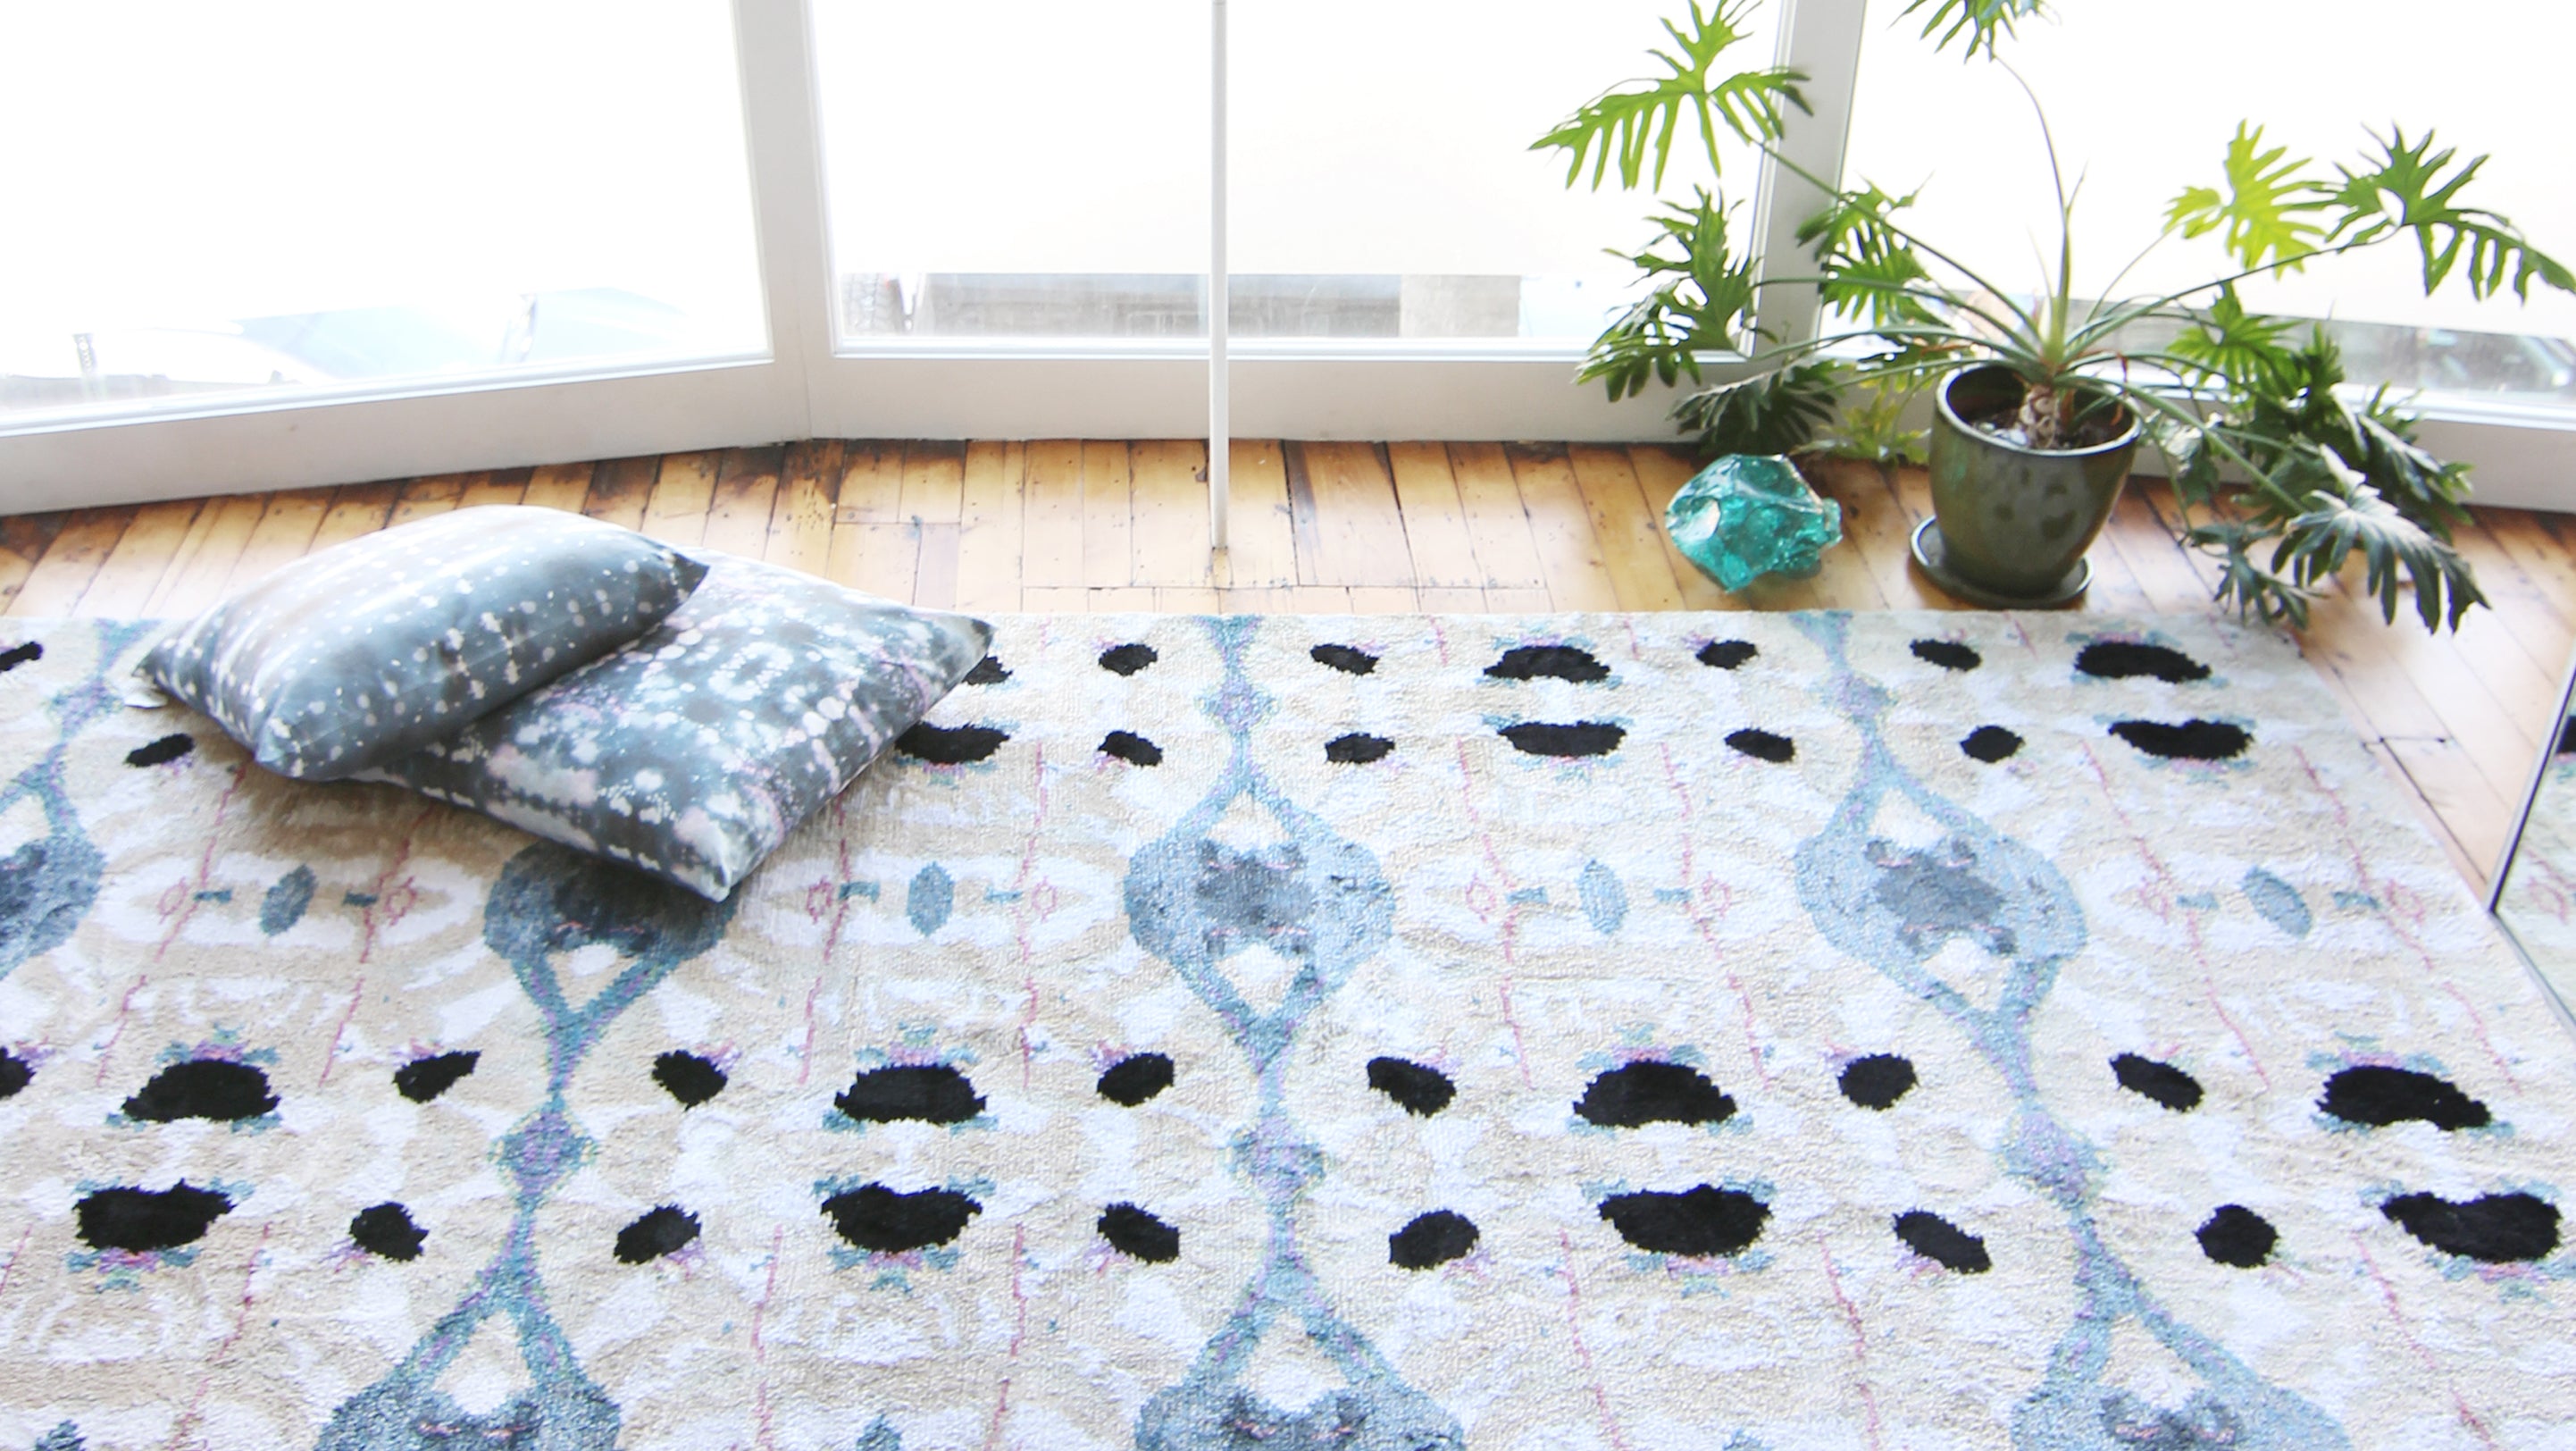 A blue rug on the floor next to a potted plant